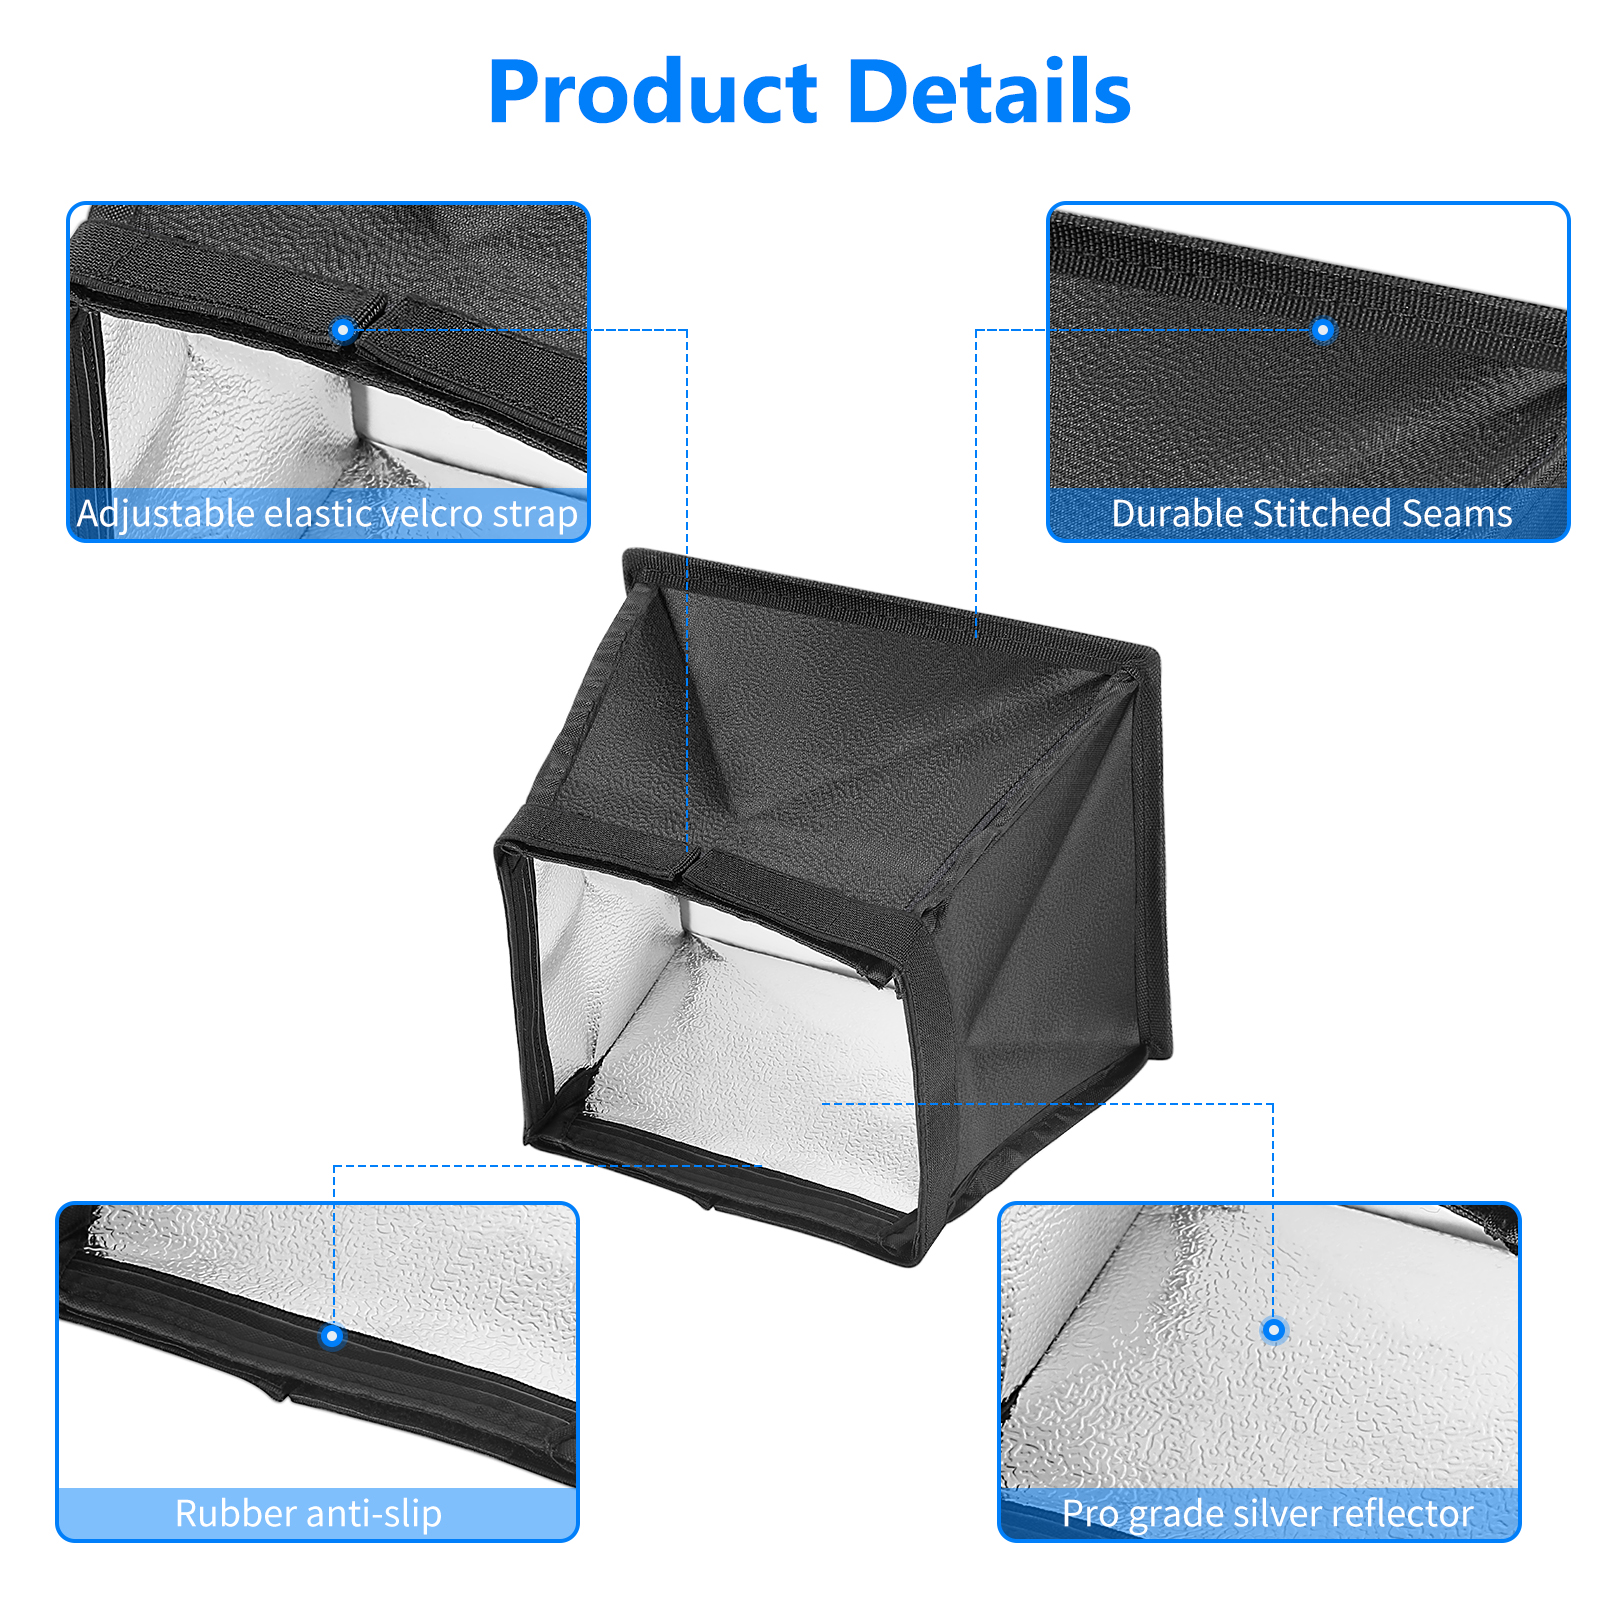 neewer collapsible softbox diffuser